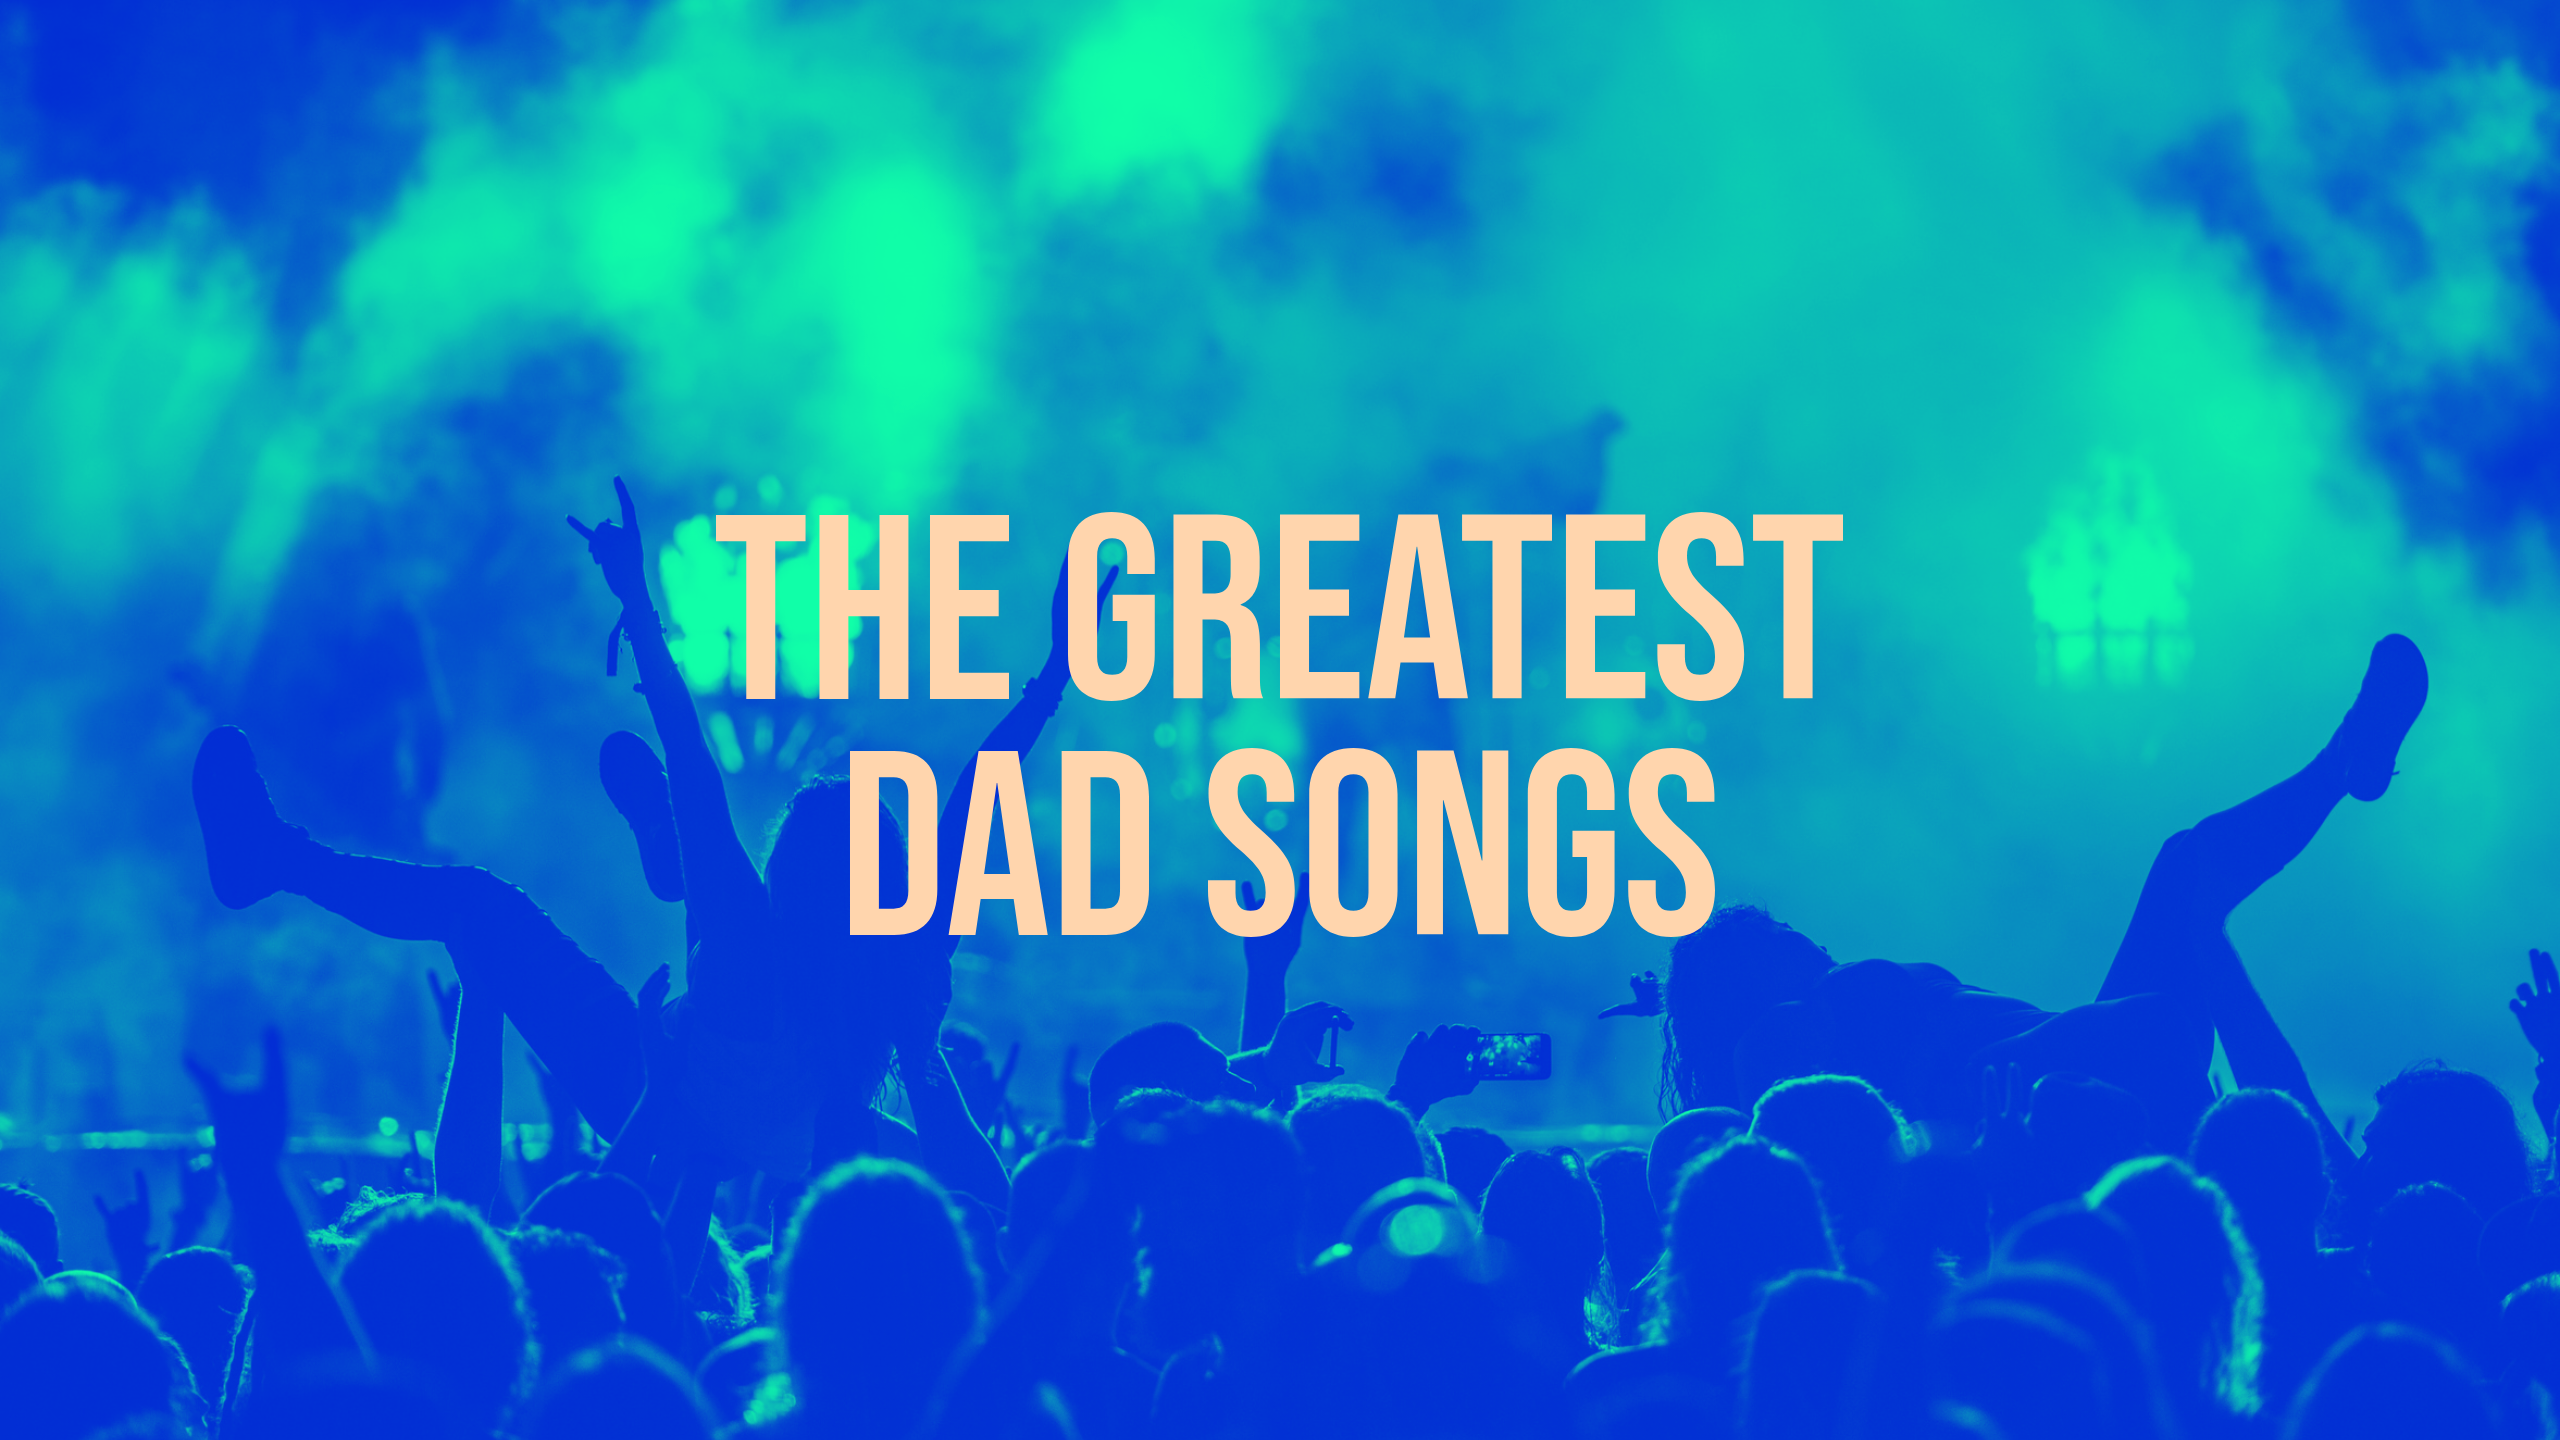 The greatest dad rock and pop songs of all time